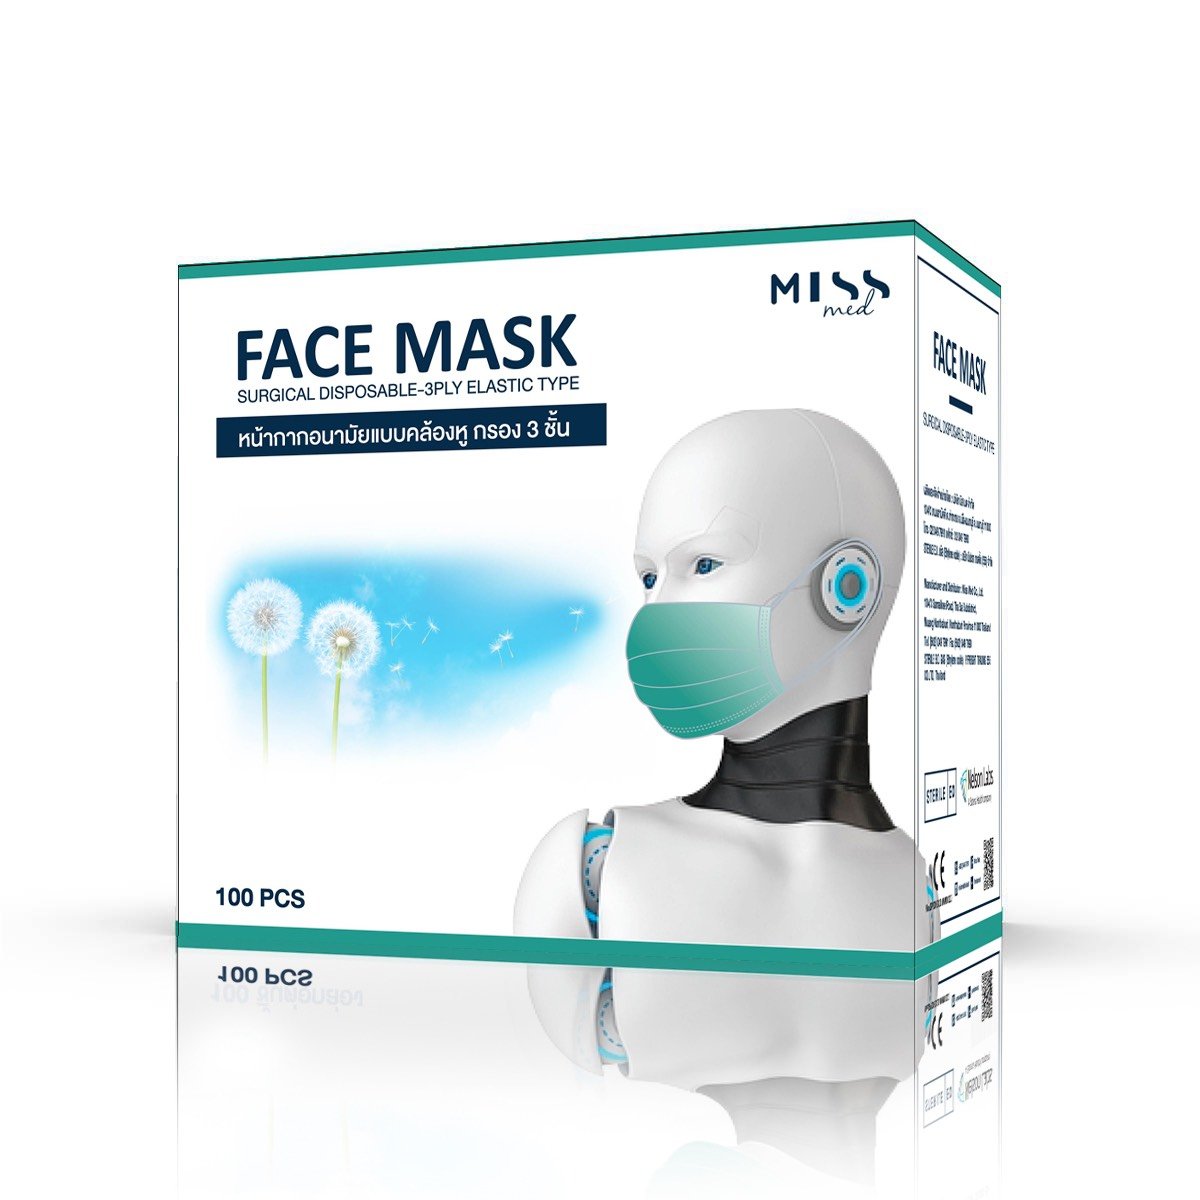 Surgical Disposable-3PLY Face Mask